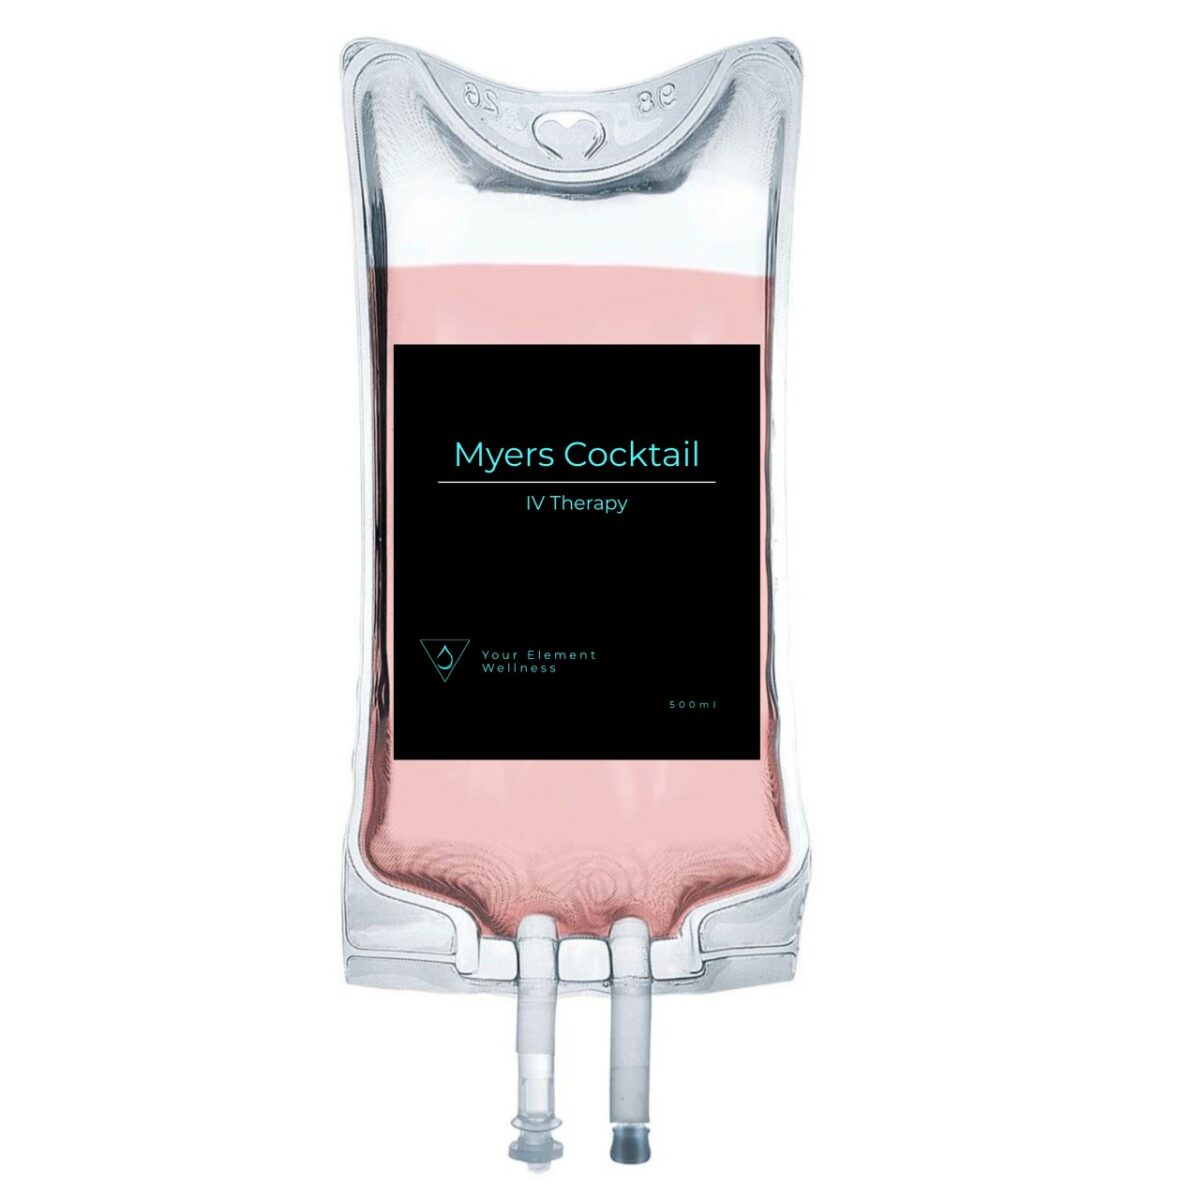 myers cocktail iv infusion